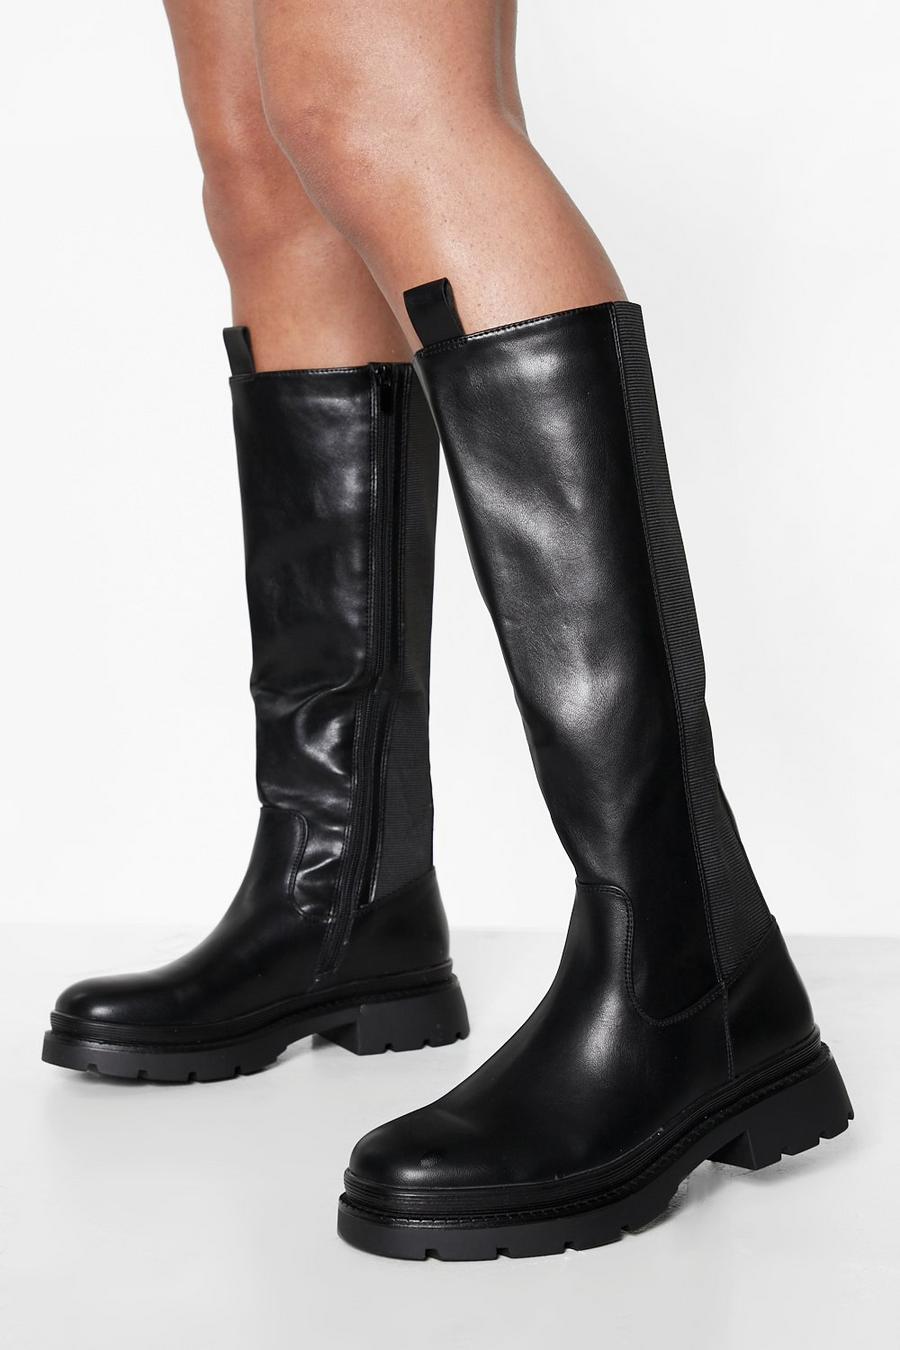 Black Knee High Panel Detail Boots